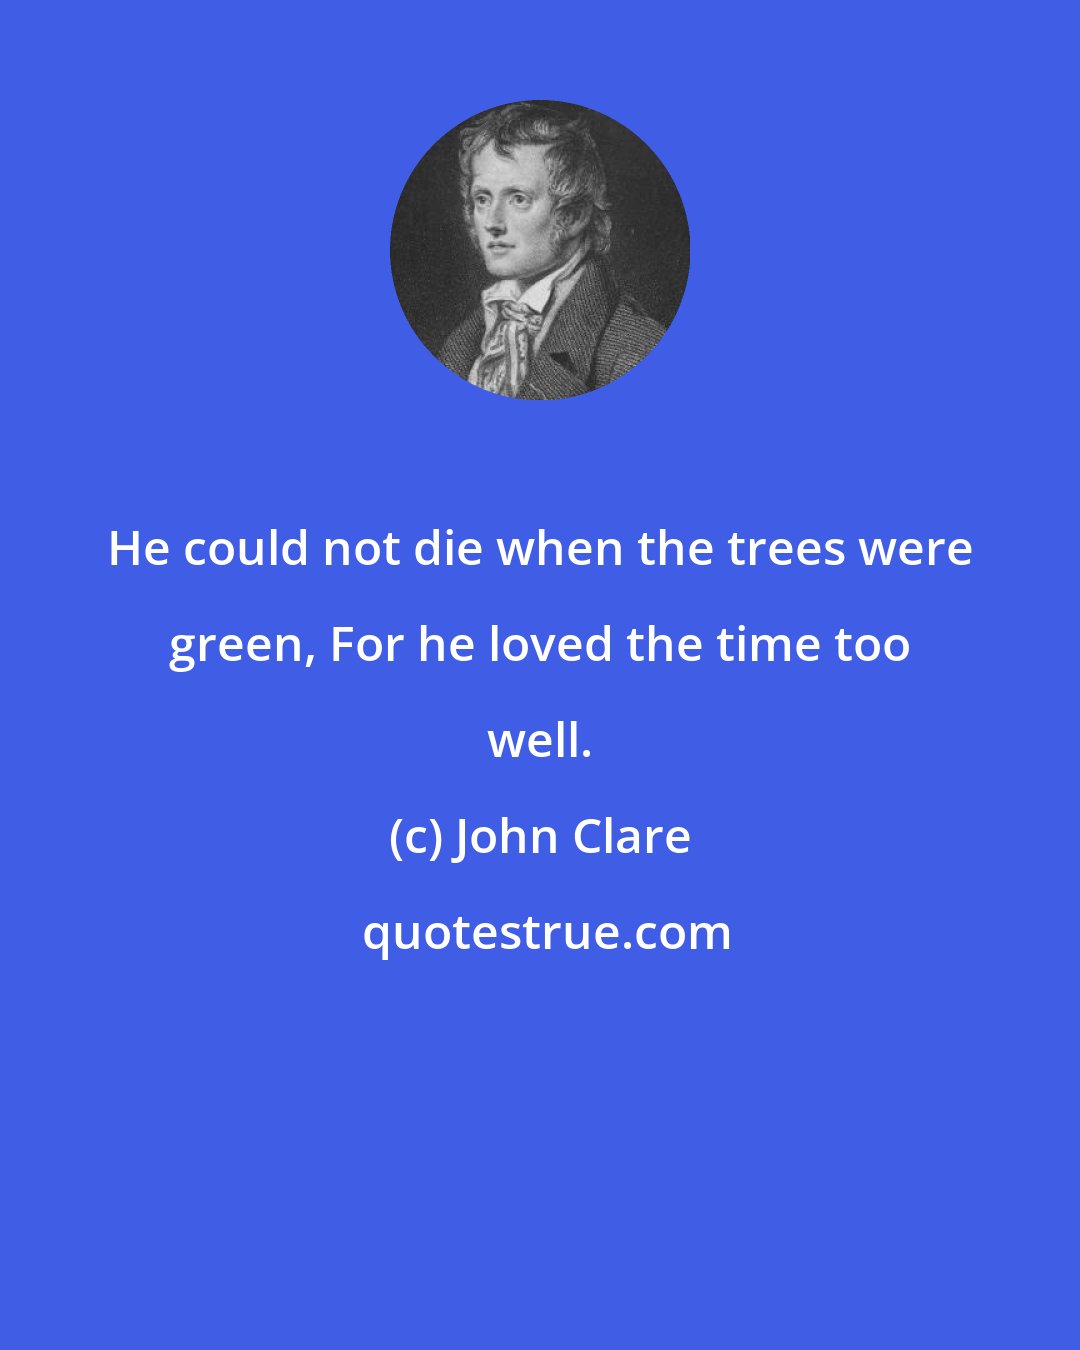 John Clare: He could not die when the trees were green, For he loved the time too well.